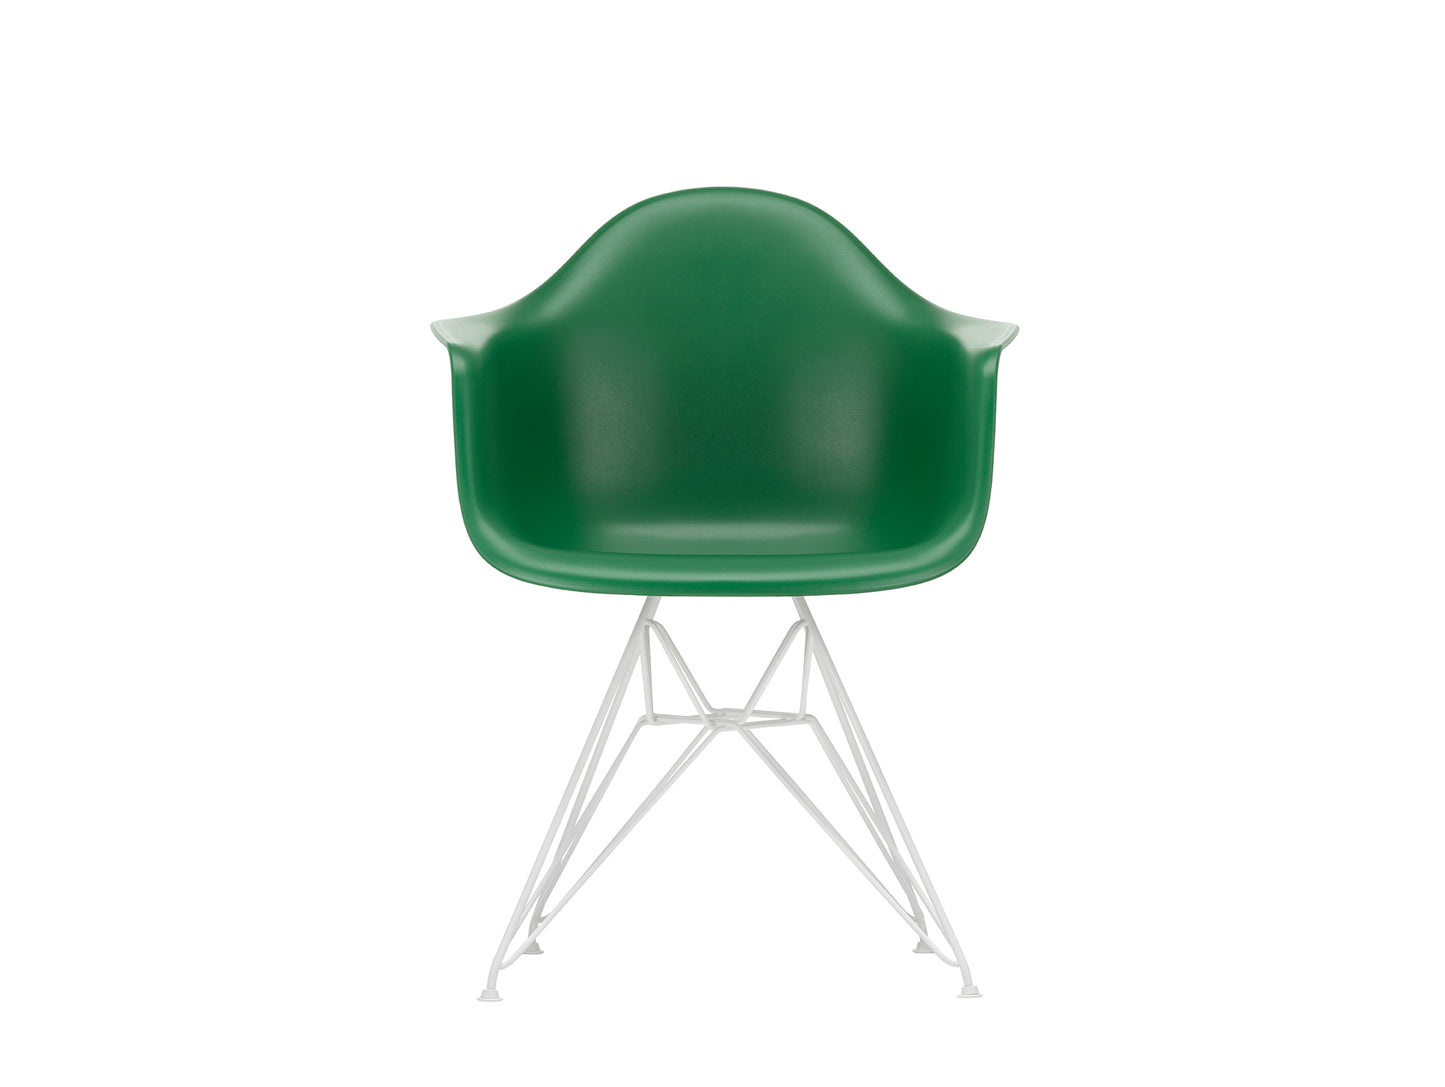 Eames DAR Plastic Armchair RE by Vitra - 17 Emerald Shell / White Base